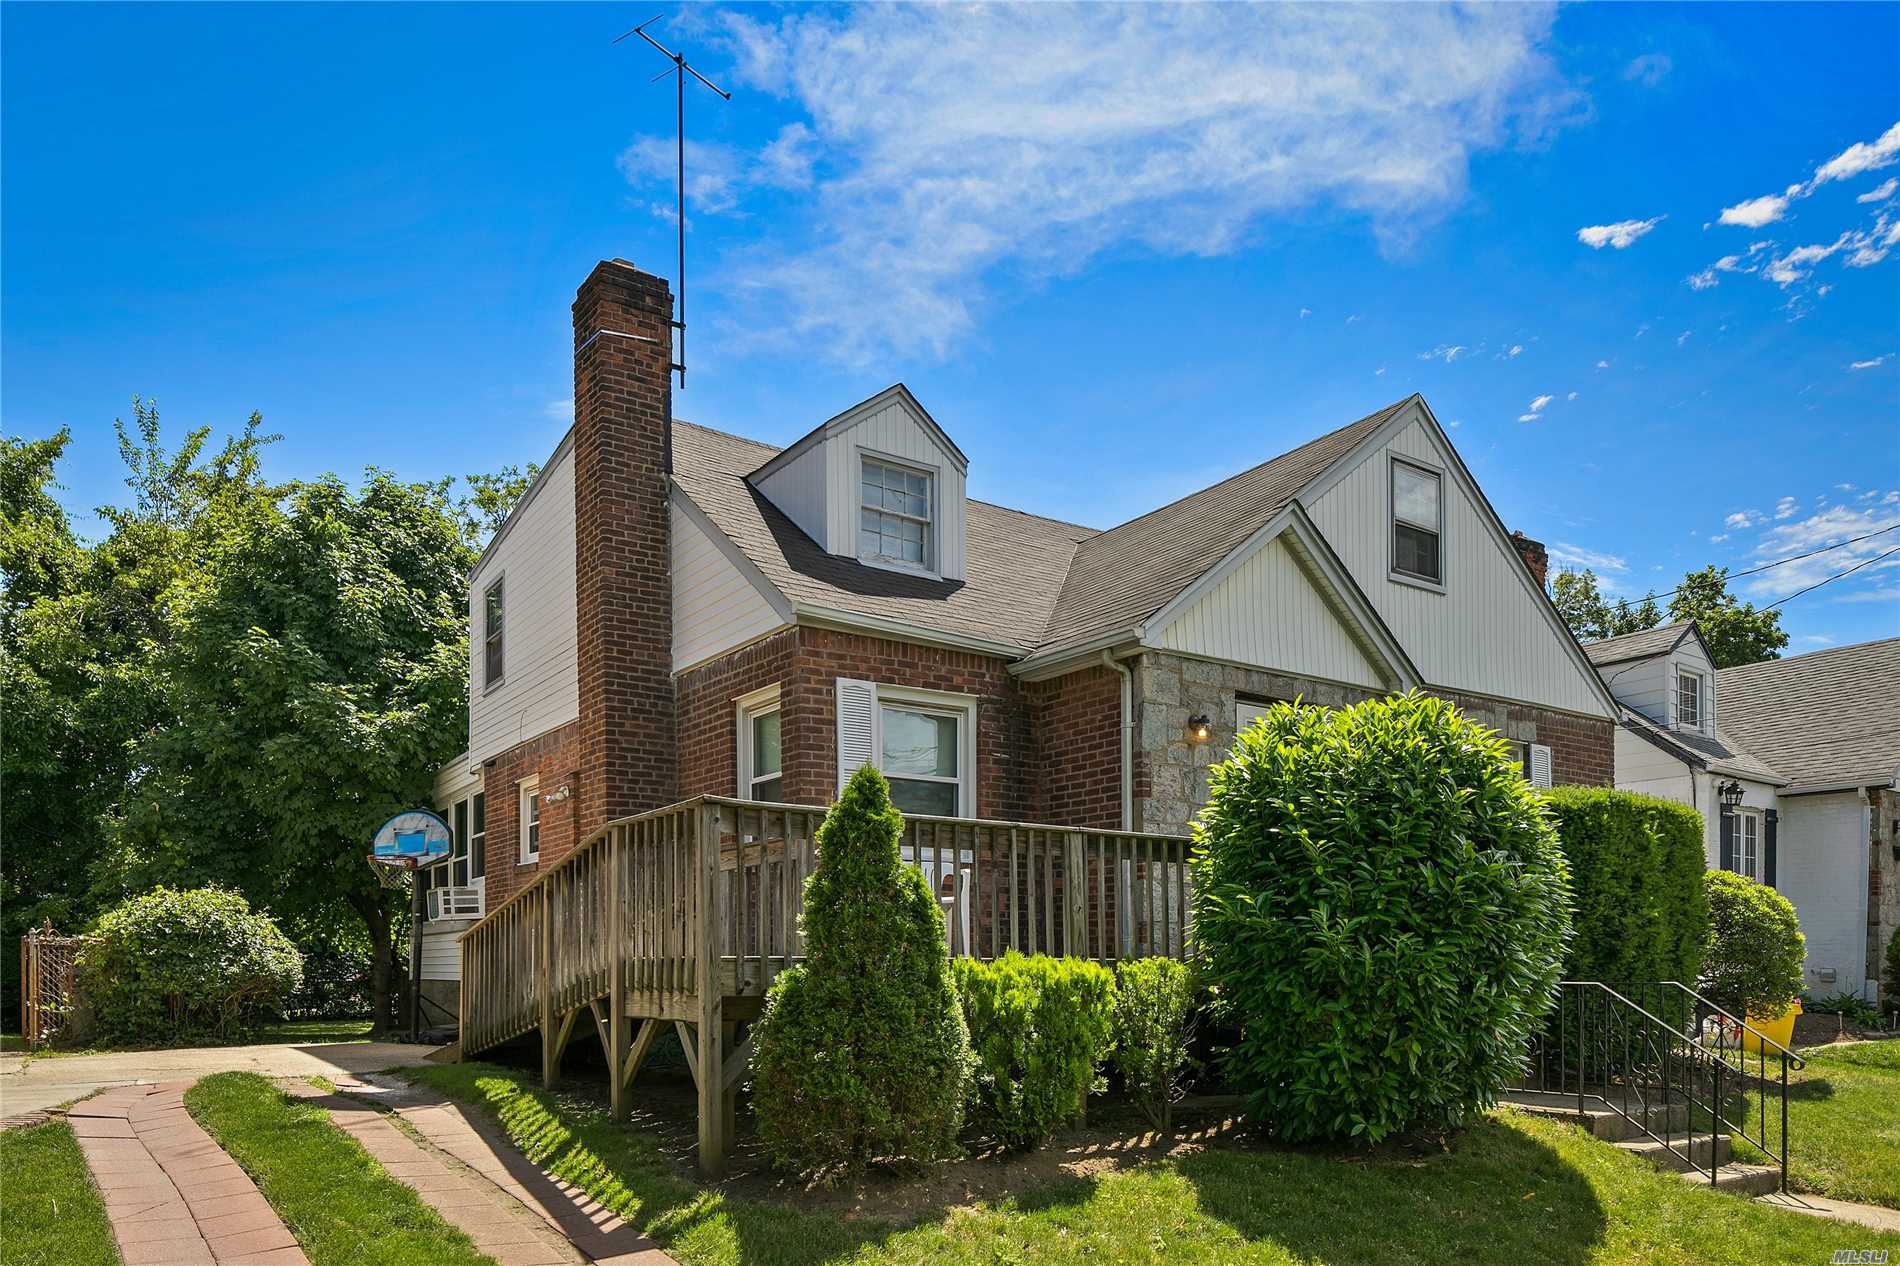 Lovely Cape With 4 Brf, 2 Full Baths, Extra Large Family Room, Dining Room, Close To Lirr, Close To Shopping And Houses Of Worship, Quiet Street, Enclosed Nice Sized Yard, Front Deck